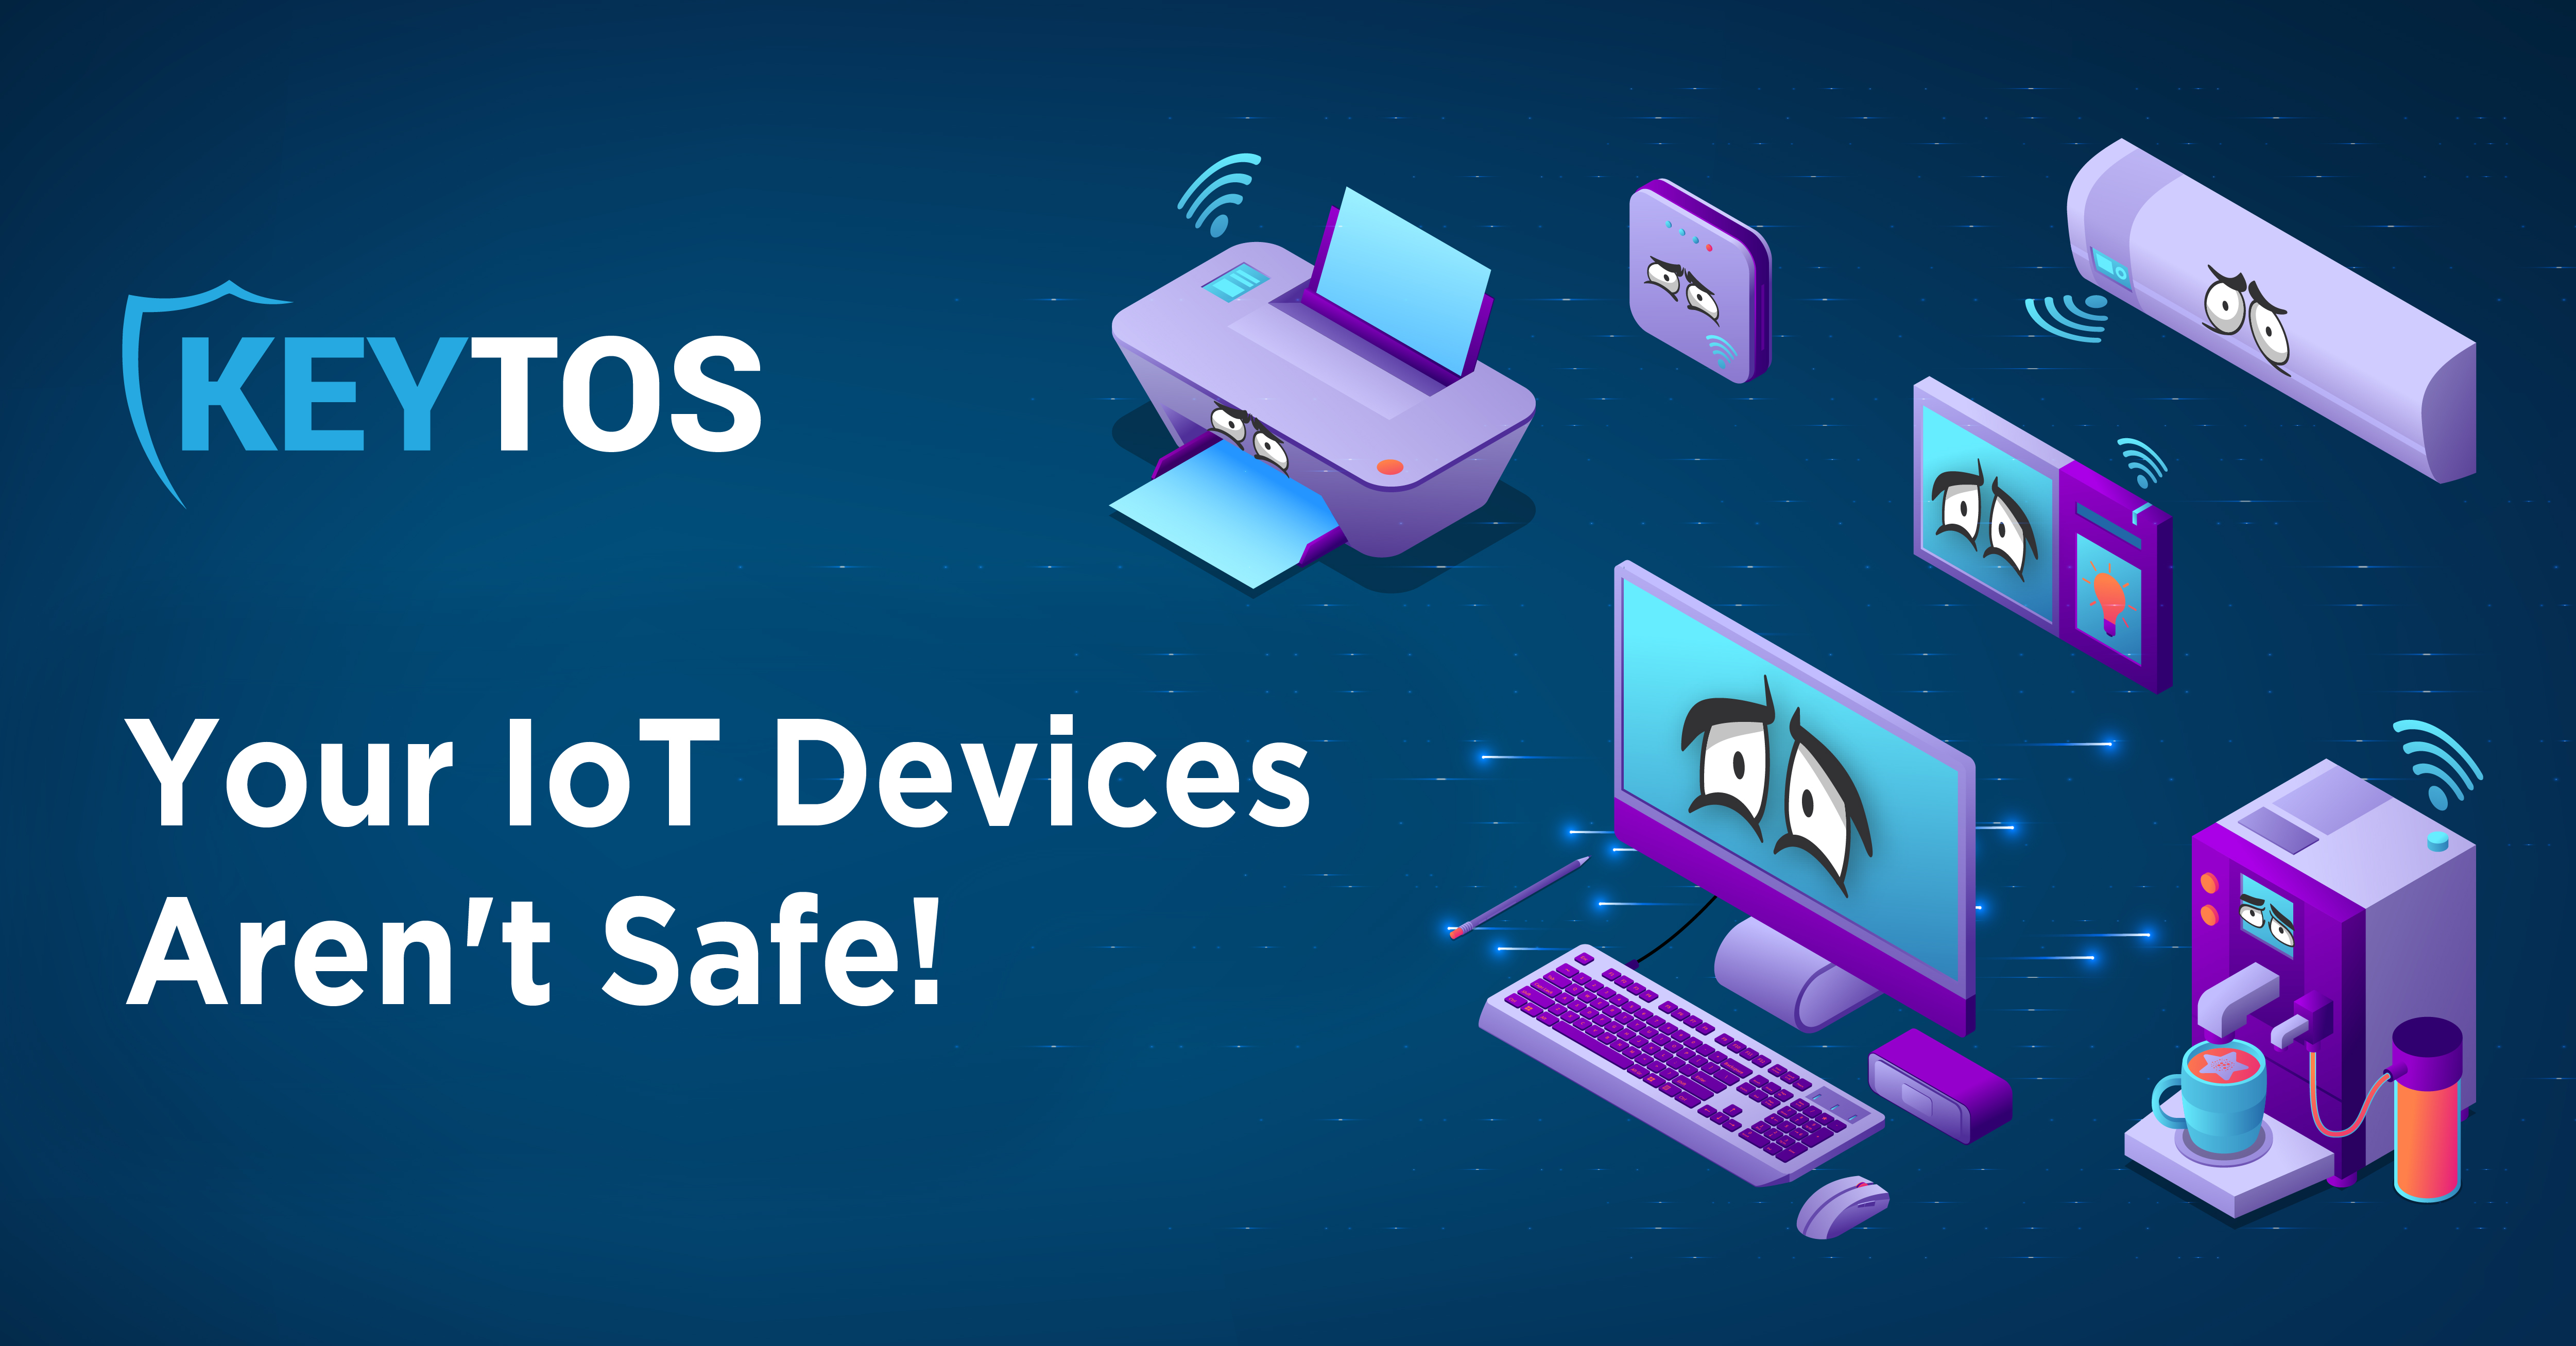 Azure IoT Device Security is at Risk – Secure Your IoT Device Today!